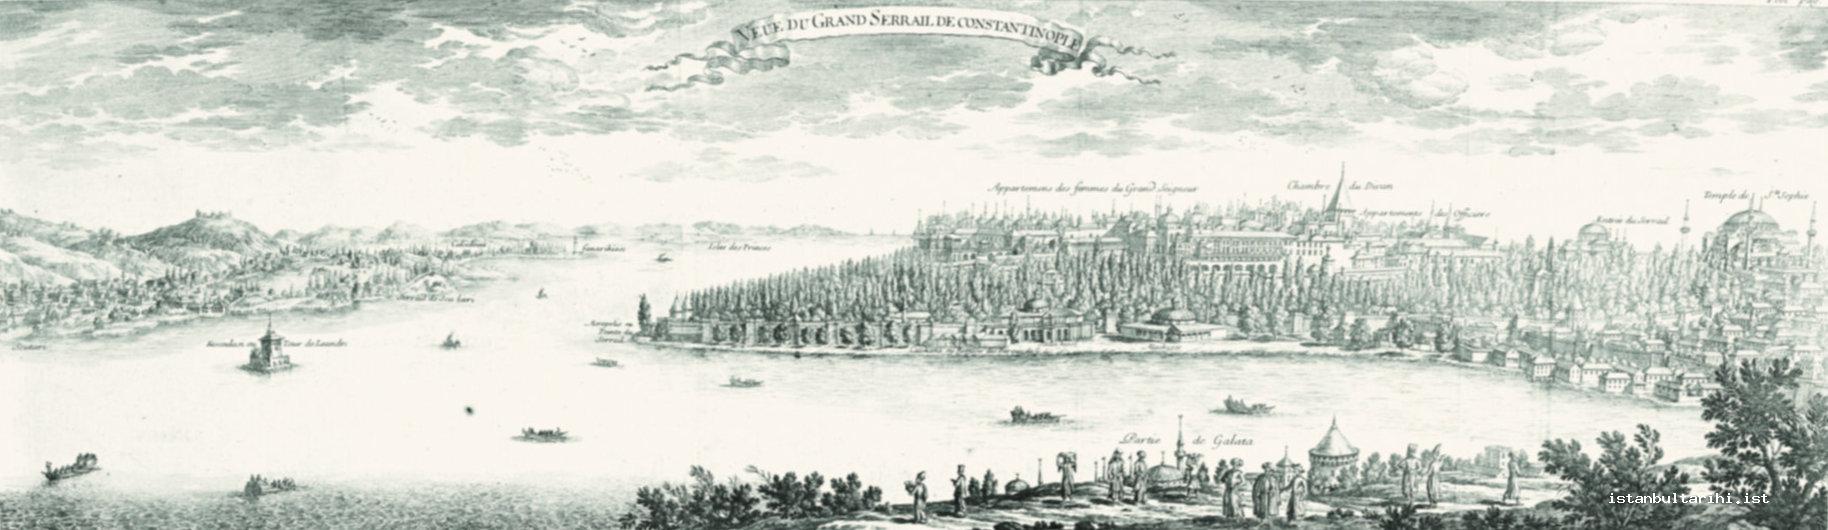 33- Sultan’s great palace, a scene from the hillside of Galata. On the left side the Maiden’s tower and Üsküdar district